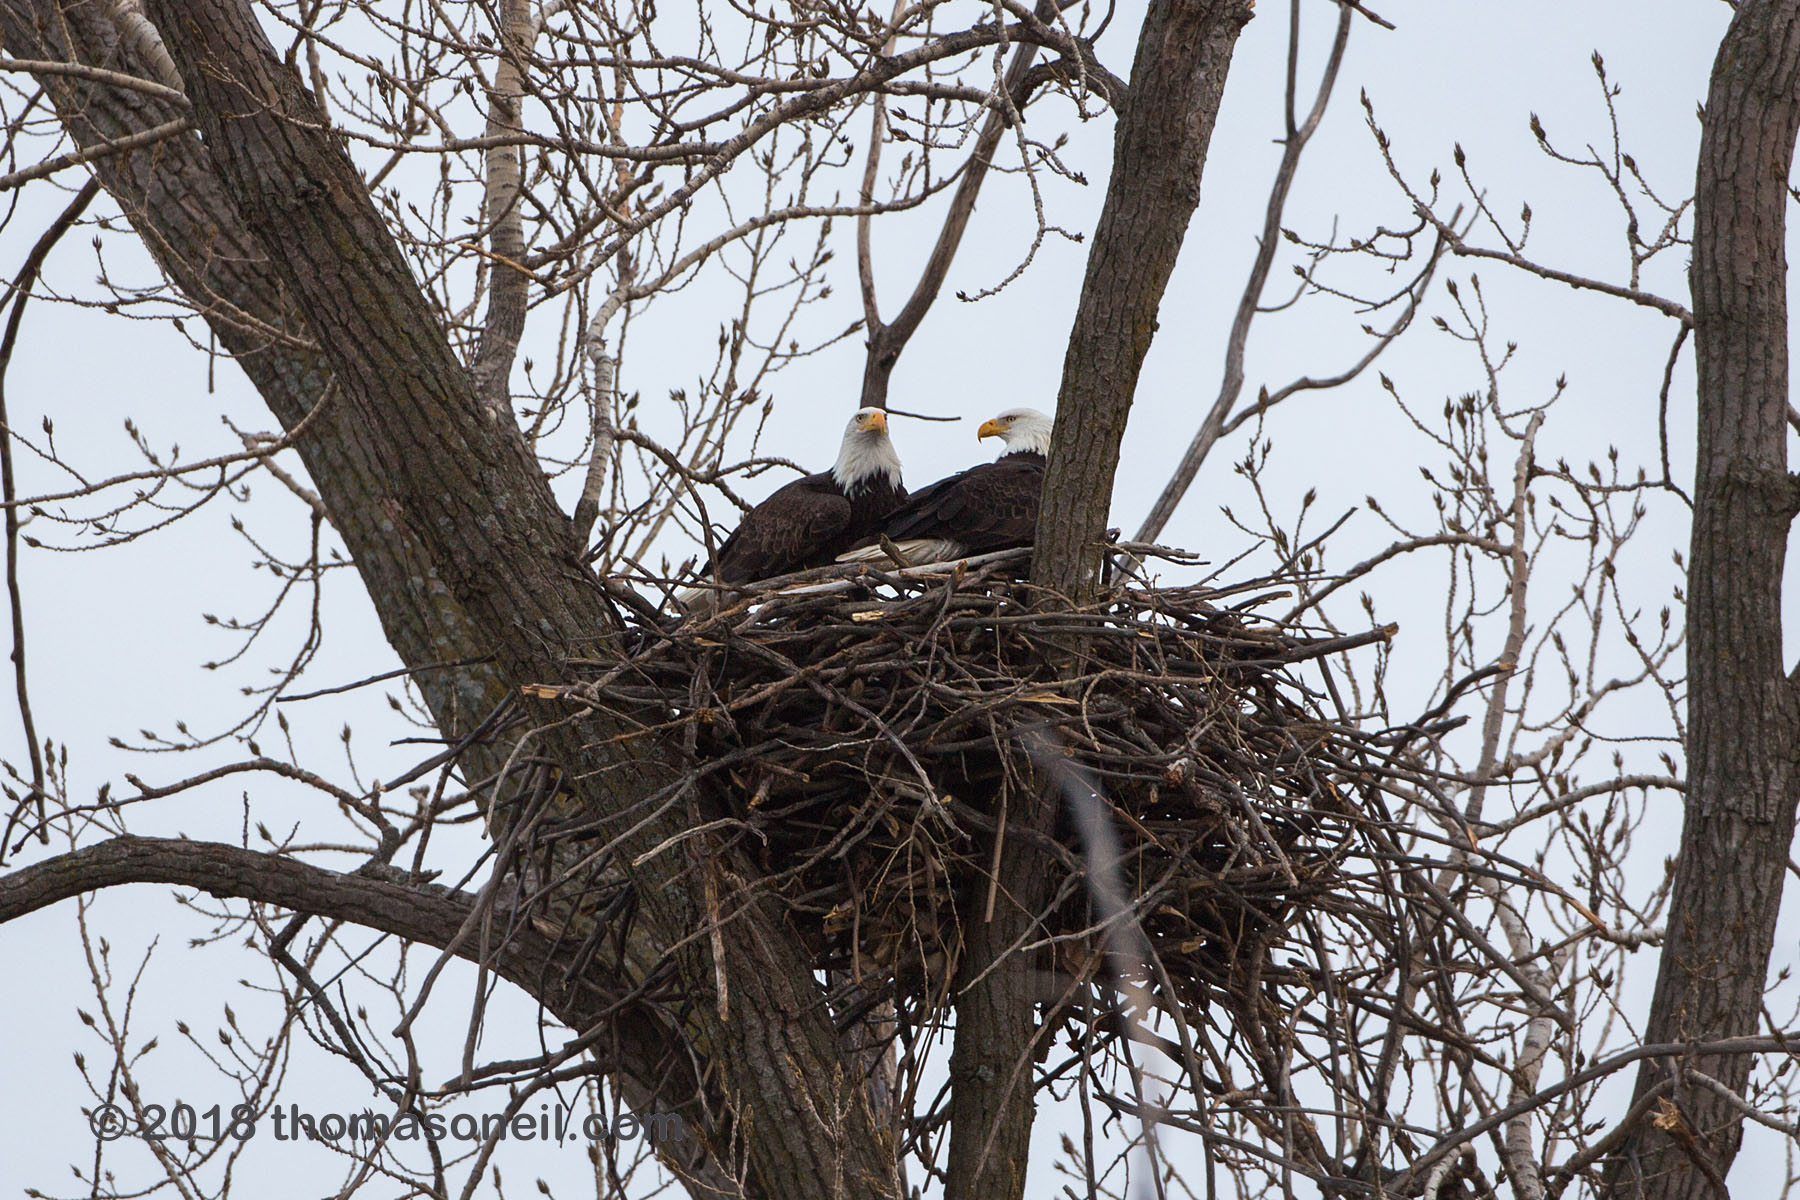 Bald eagles in nest, Loess Bluffs National Wildlife Refuge, Missouri.  Click for next photo.